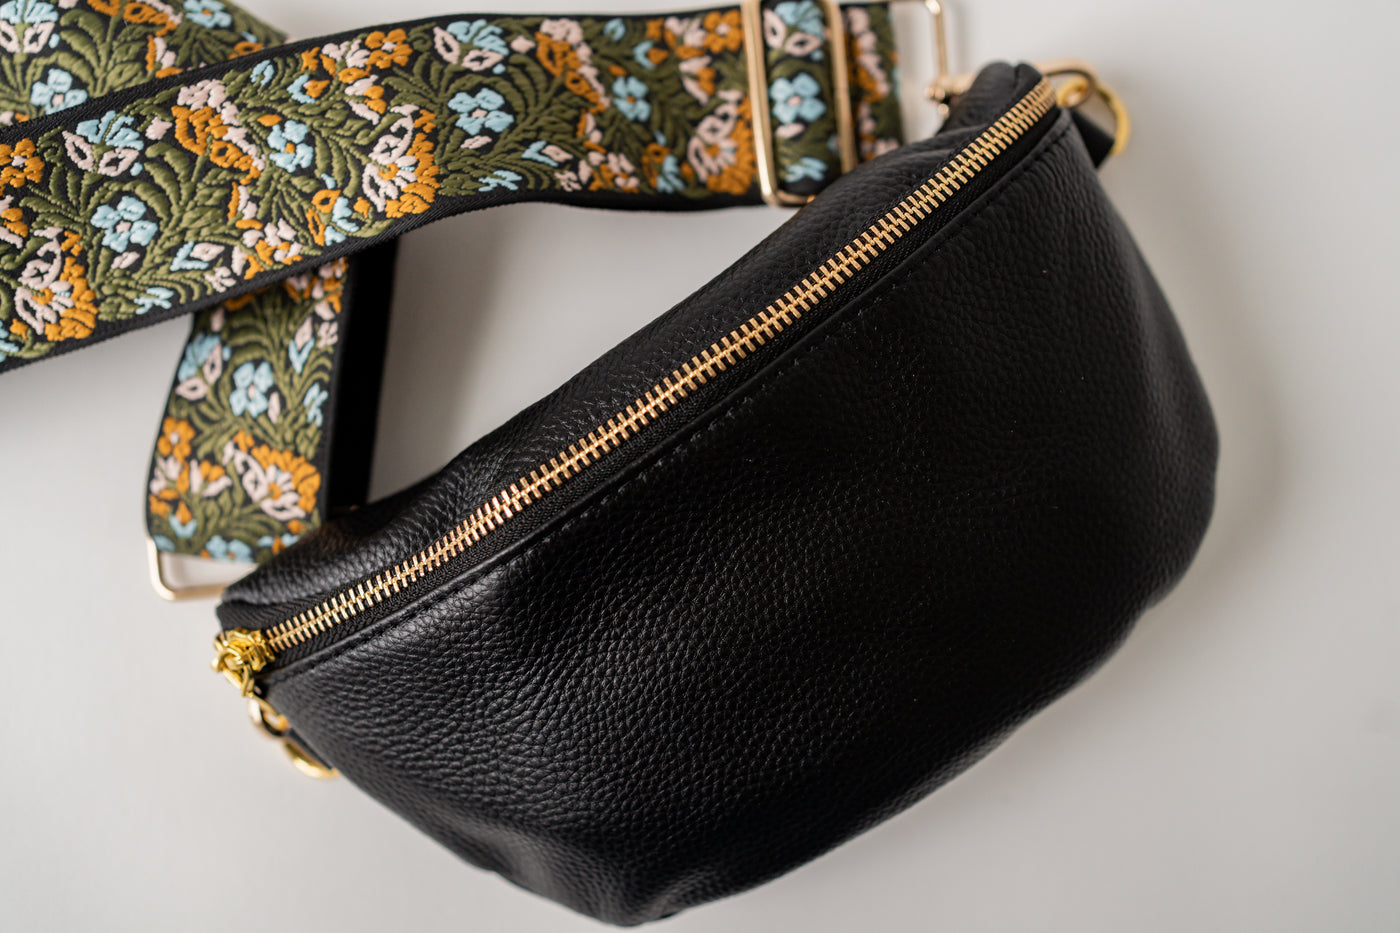 Floral Embroidered Crossbody Bag Strap